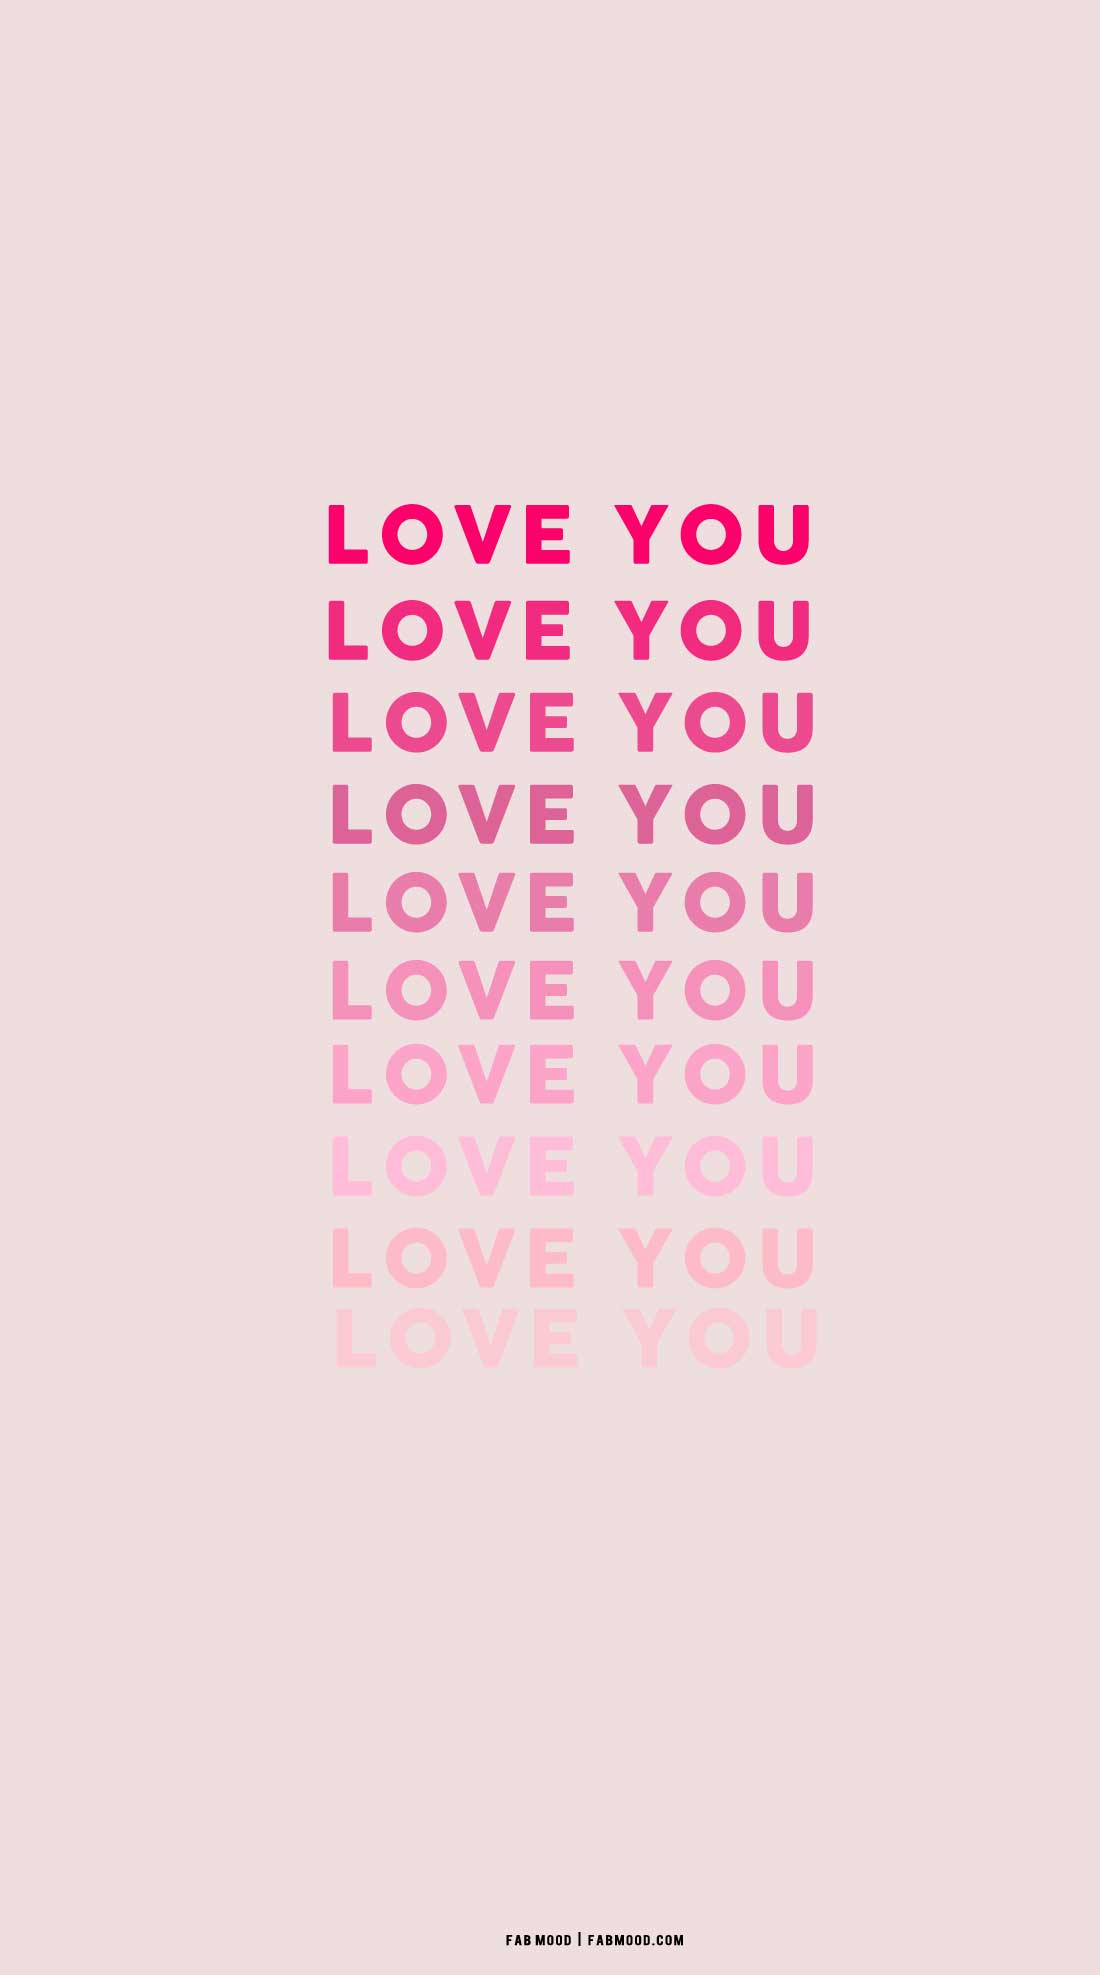 love you wallpaper phone, valentine's day wallpaper iphone, aesthetic valentine's day wallpaper, valentines day wallpaper, valentine's day wallpaper cute, valentines wallpaper ideas, valentines wallpaper iphone, valentines wallpaper phone, aesthetic valentine wallpaper